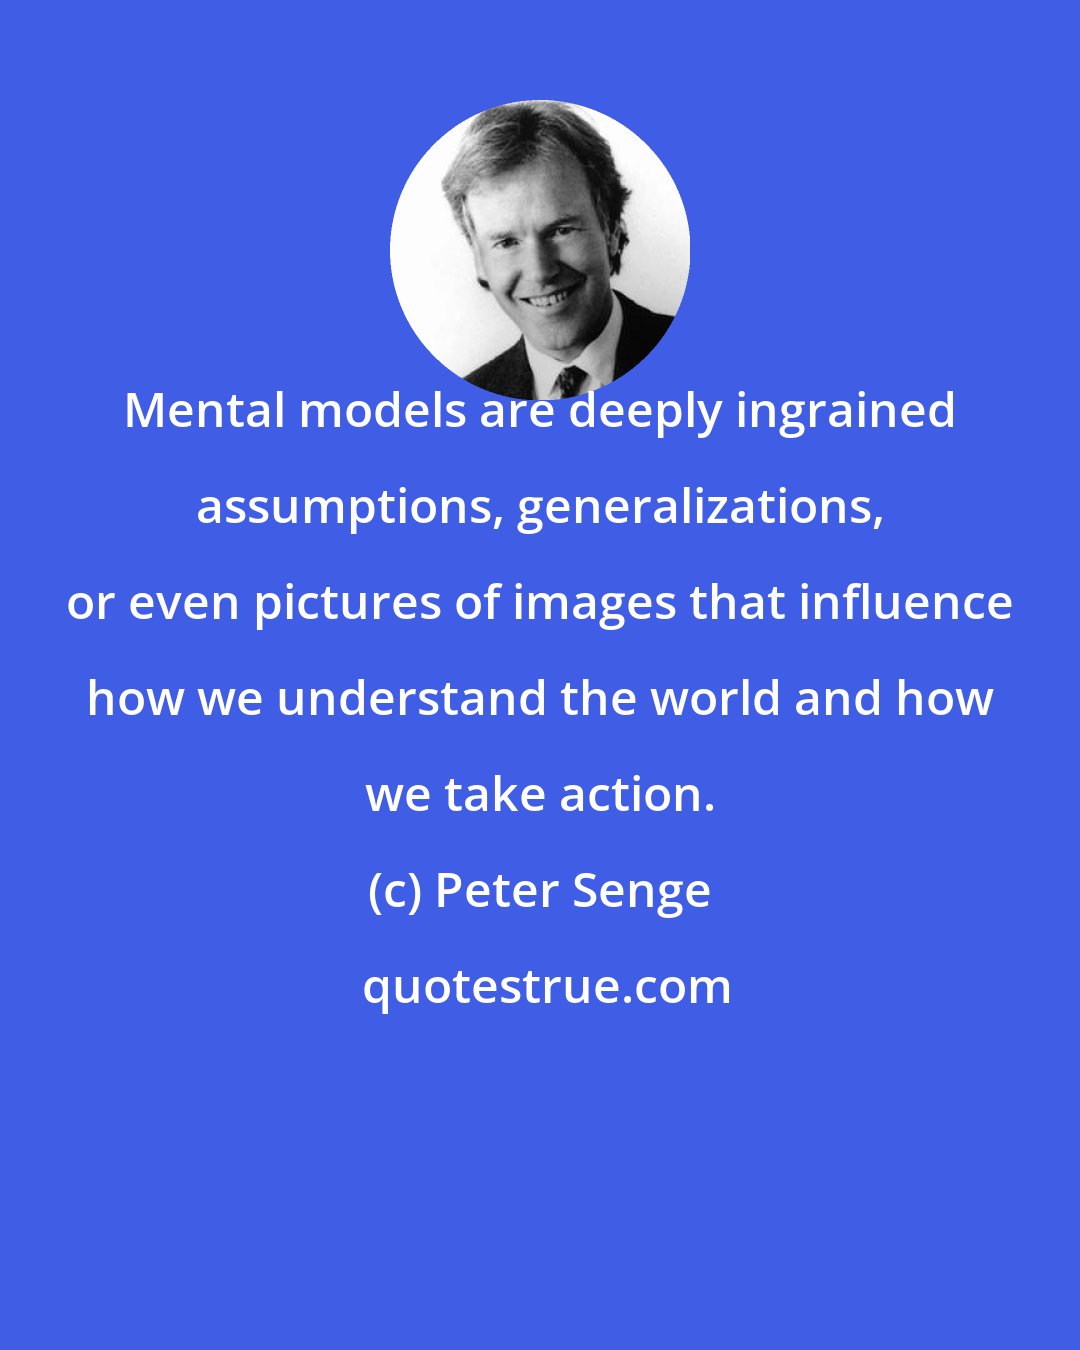 Peter Senge: Mental models are deeply ingrained assumptions, generalizations, or even pictures of images that influence how we understand the world and how we take action.